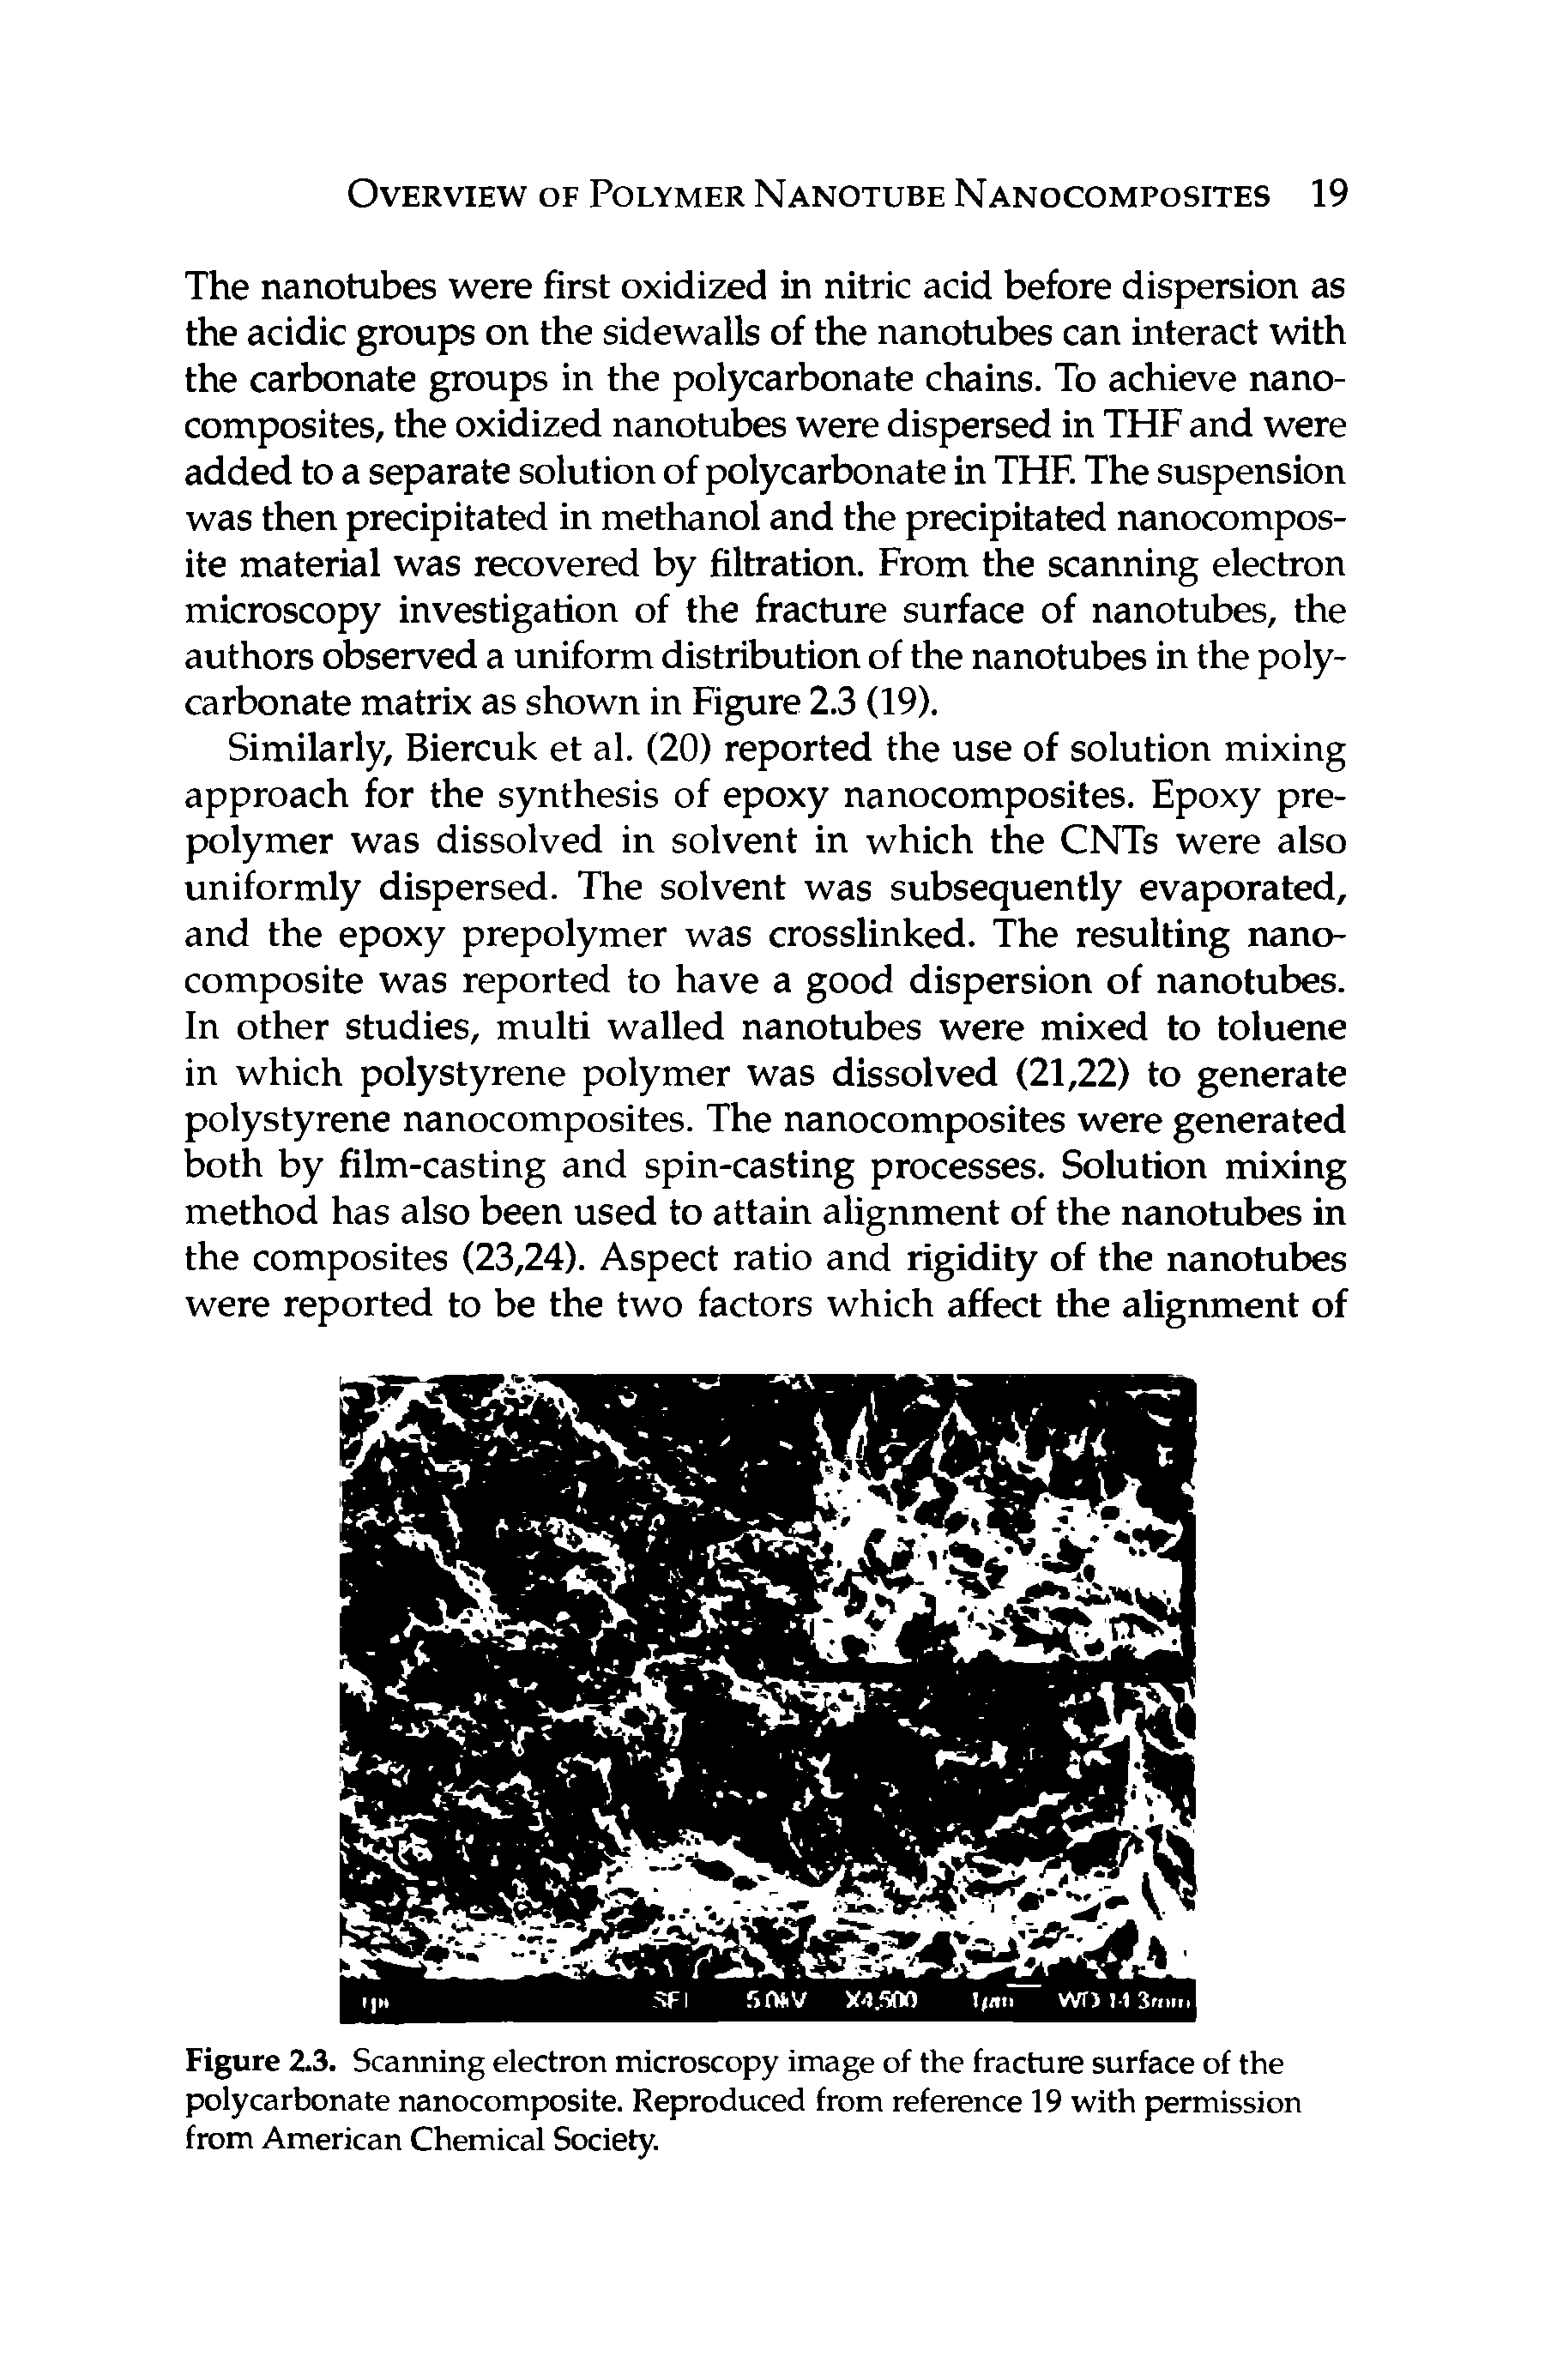 Figure 2.3. Scanning electron microscopy image of the fracture surface of the polycarbonate nanocomposite. Reproduced from reference 19 with permission from American Chemical Society.